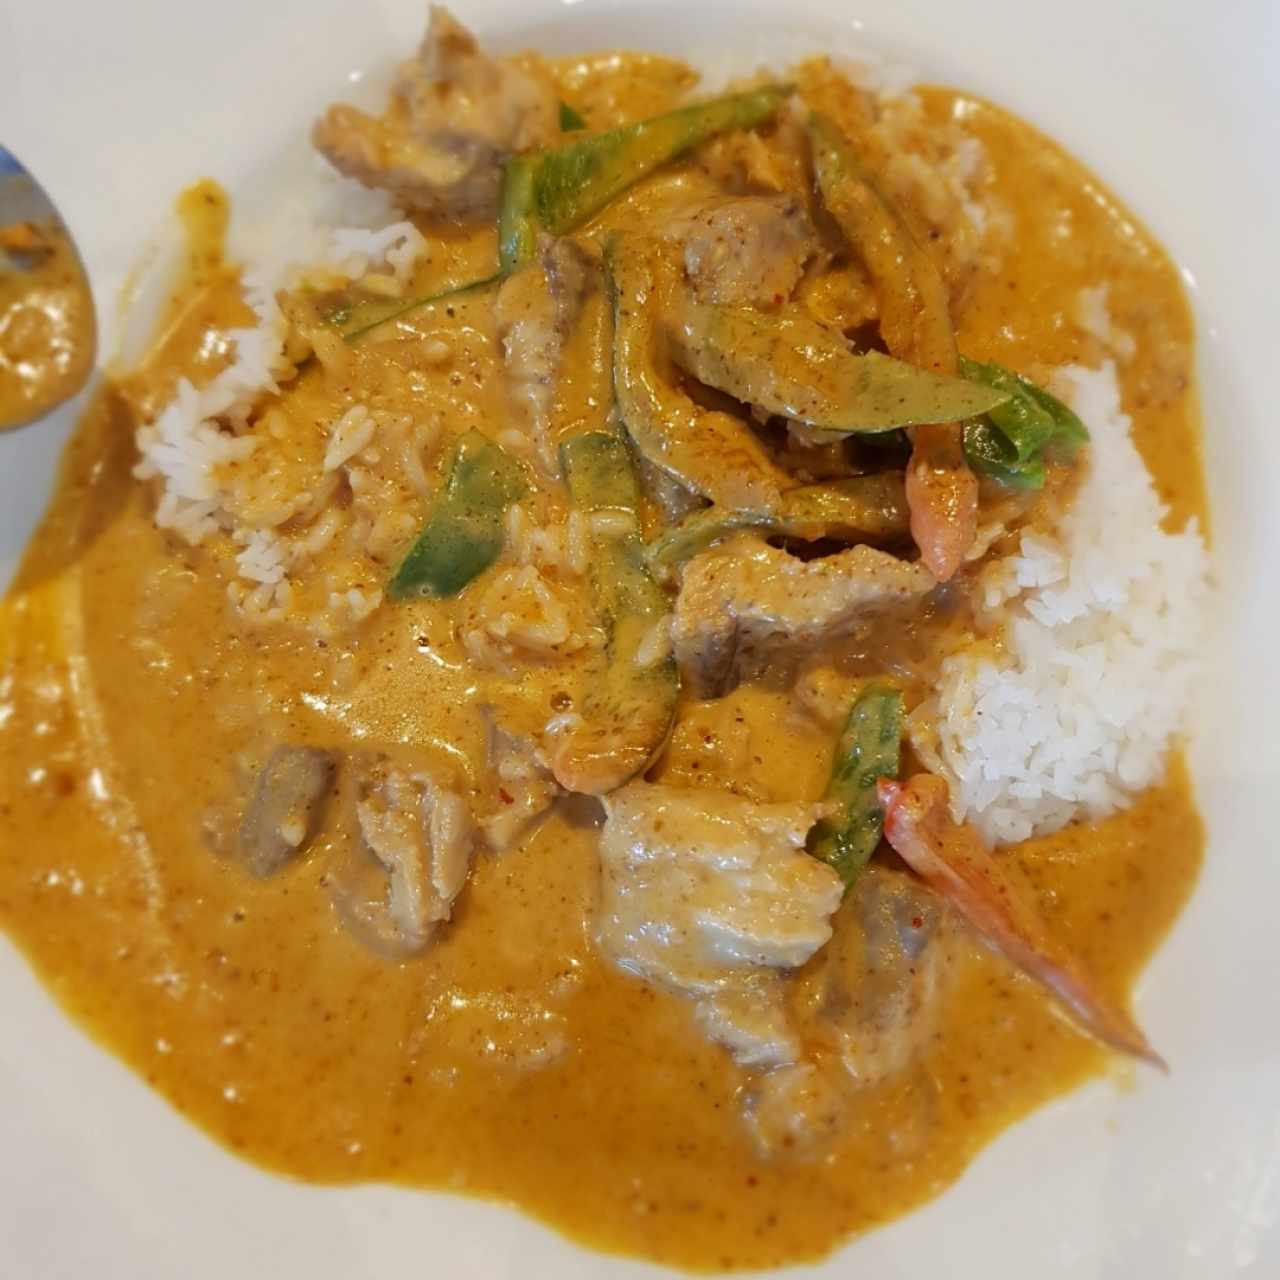 Penang curry - delicious!!!